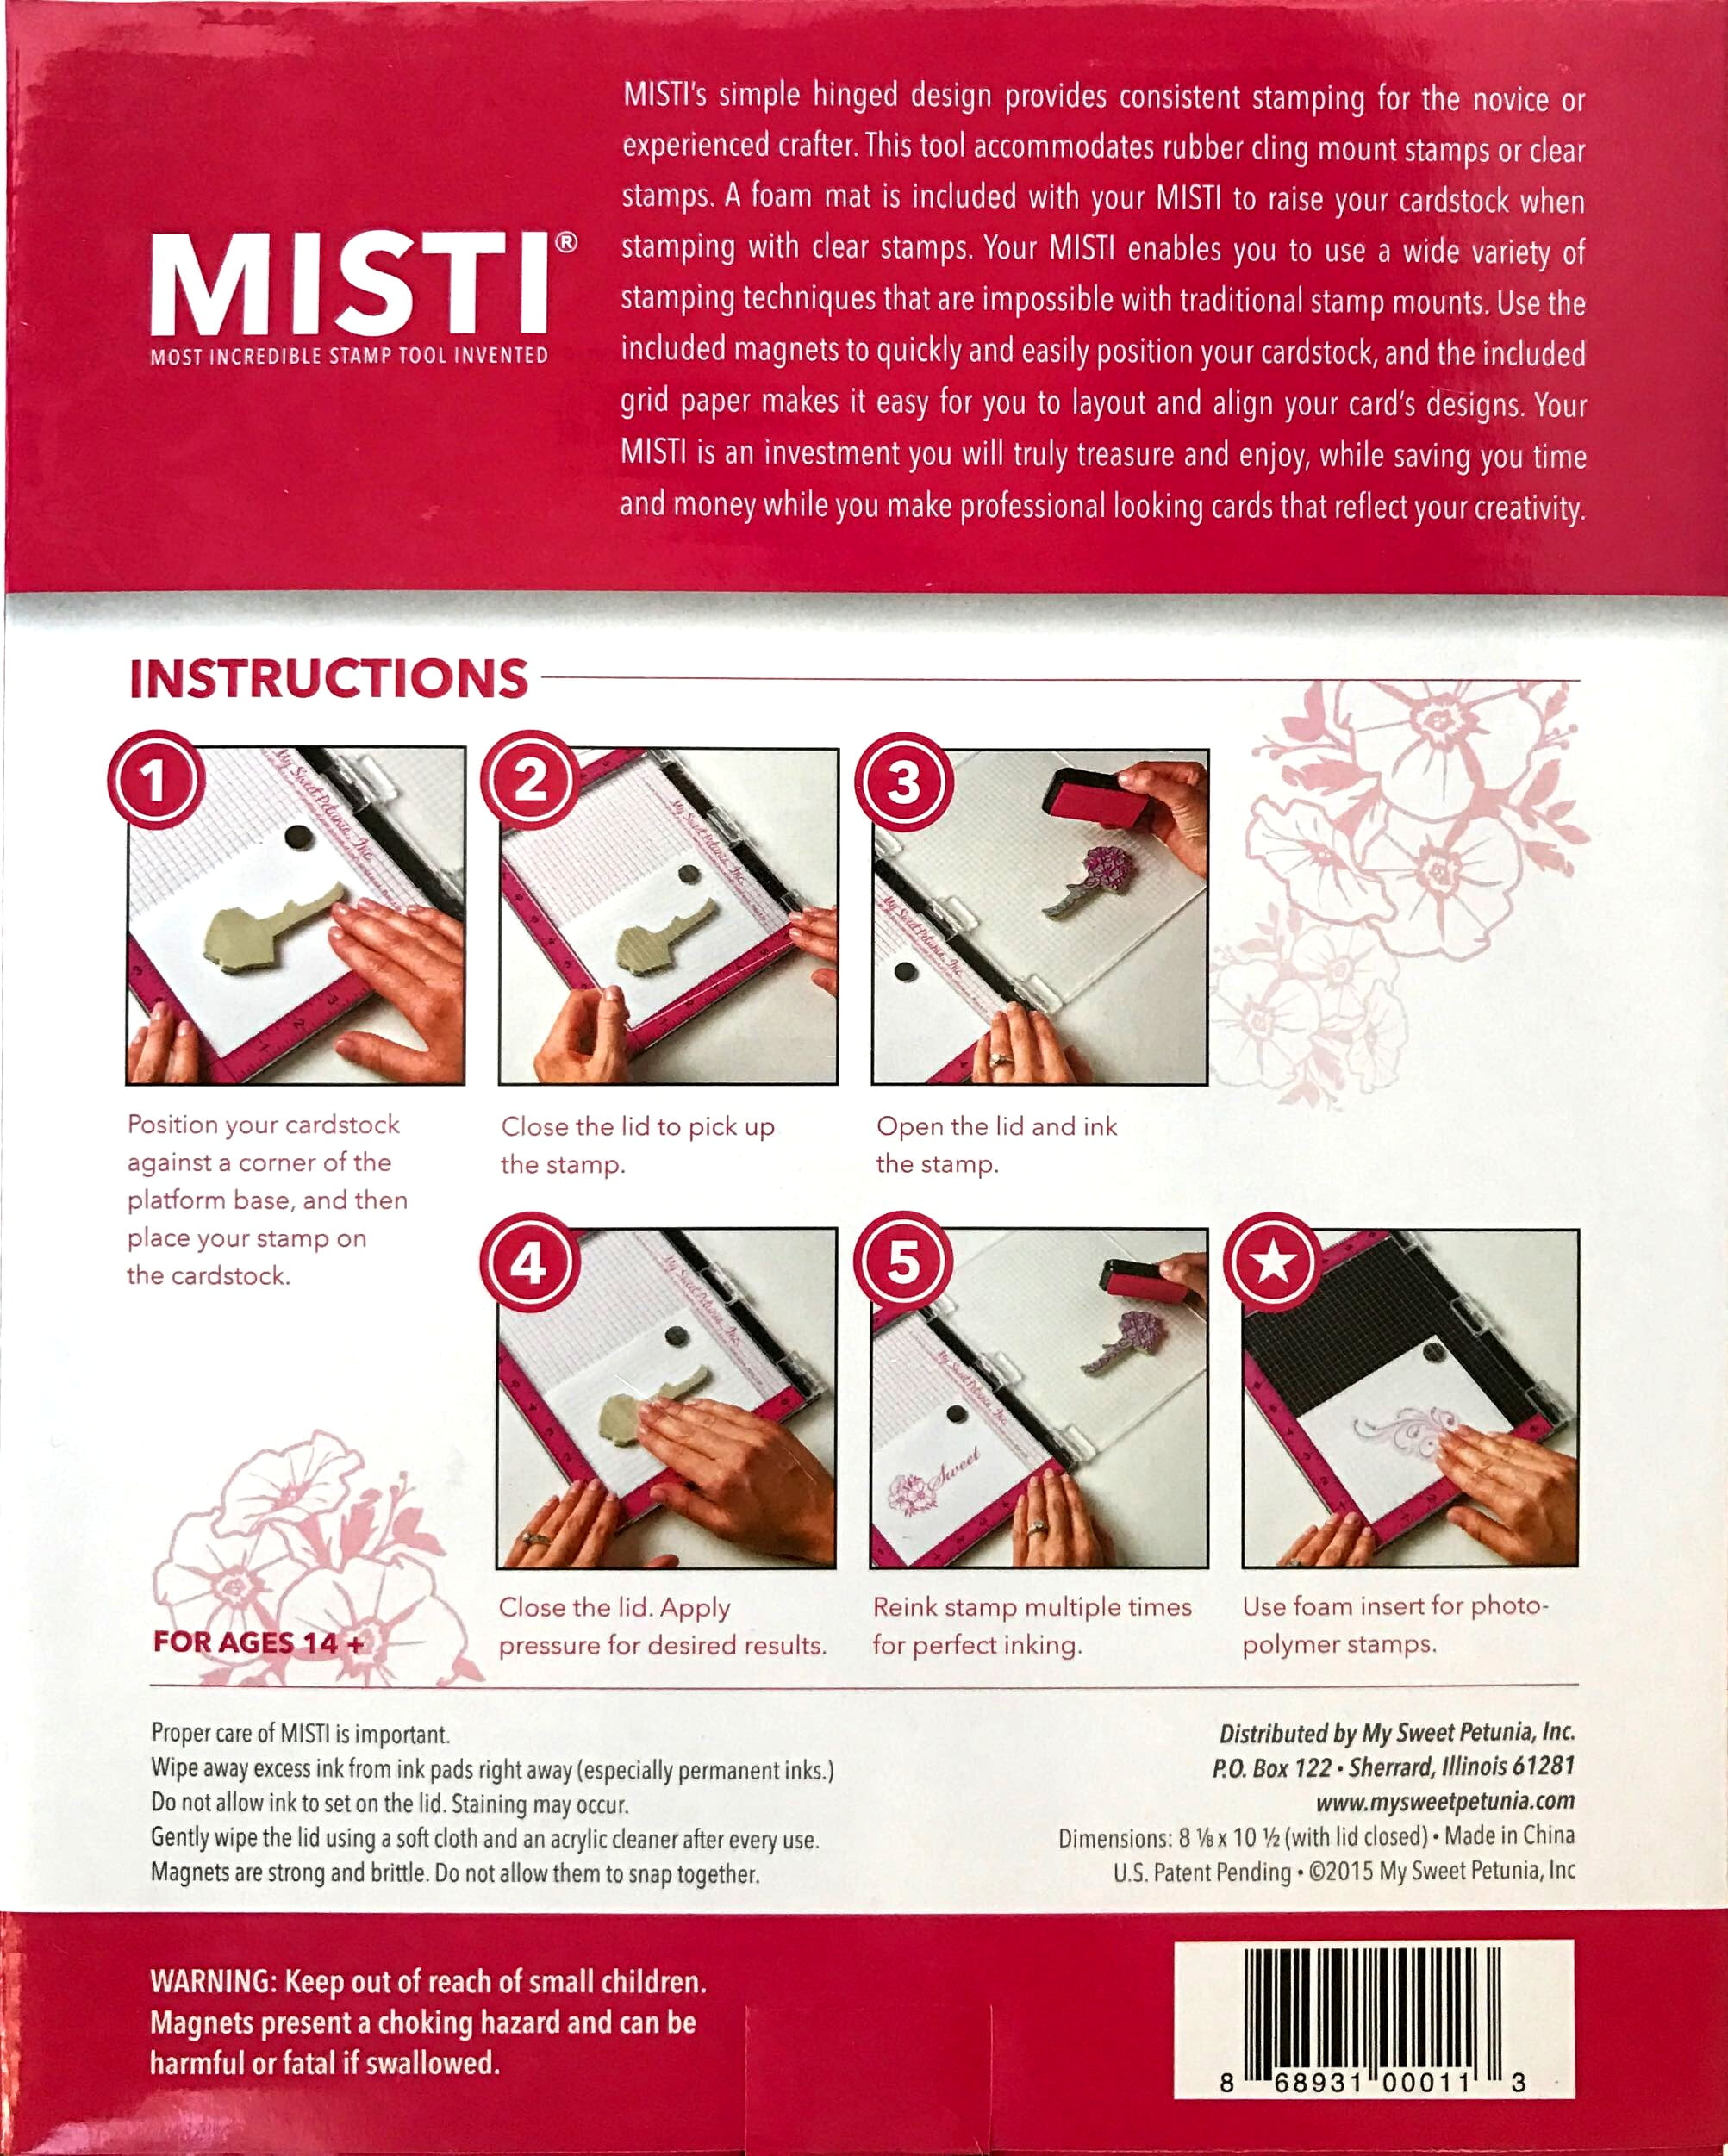 5 Amazing Things You Can Do with a Misti